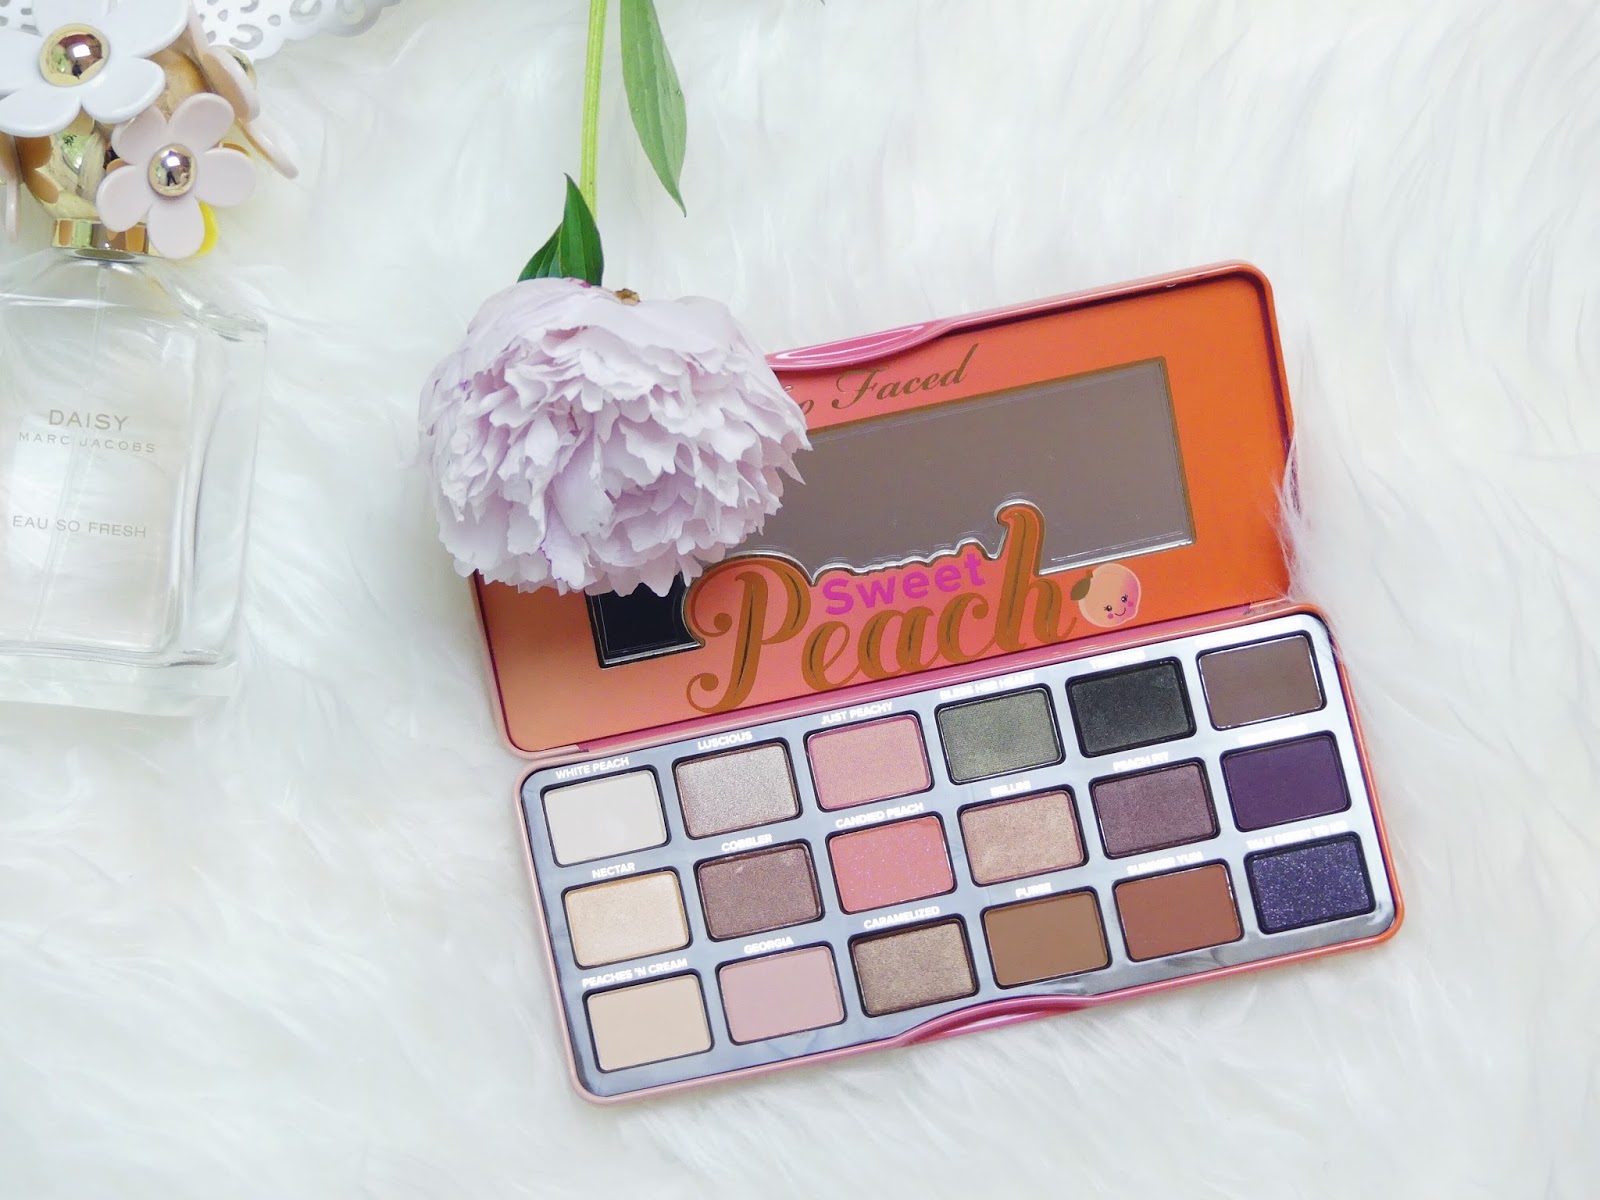 Too Faced Sweet Peach Palette - worth the hype?